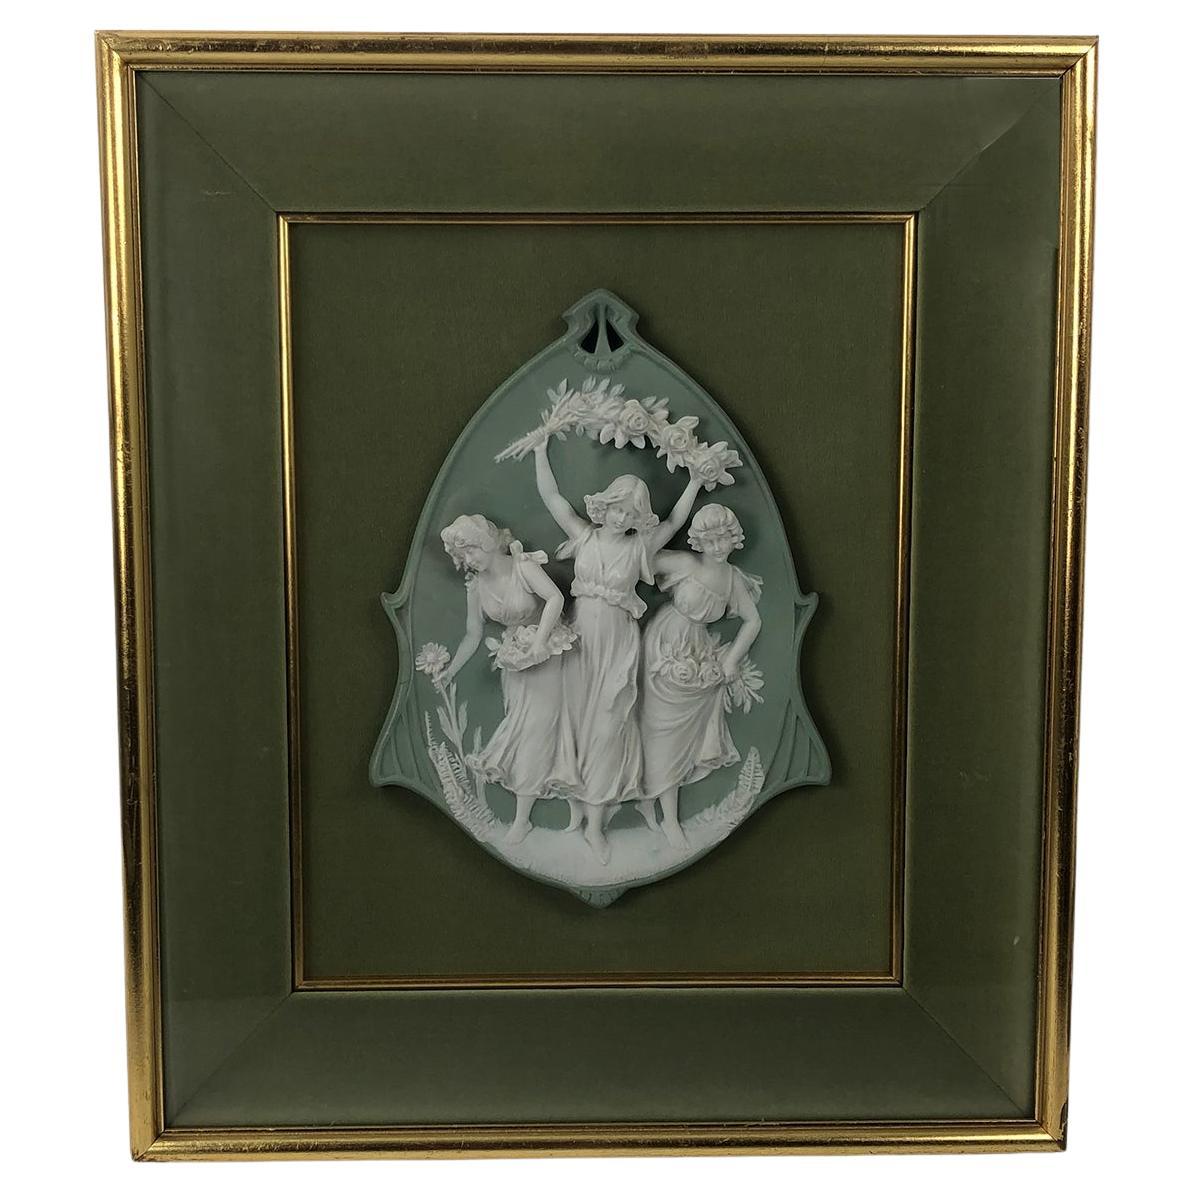 Framed Biscuit Porcelain Jasperware Relief Cameo with Three Women